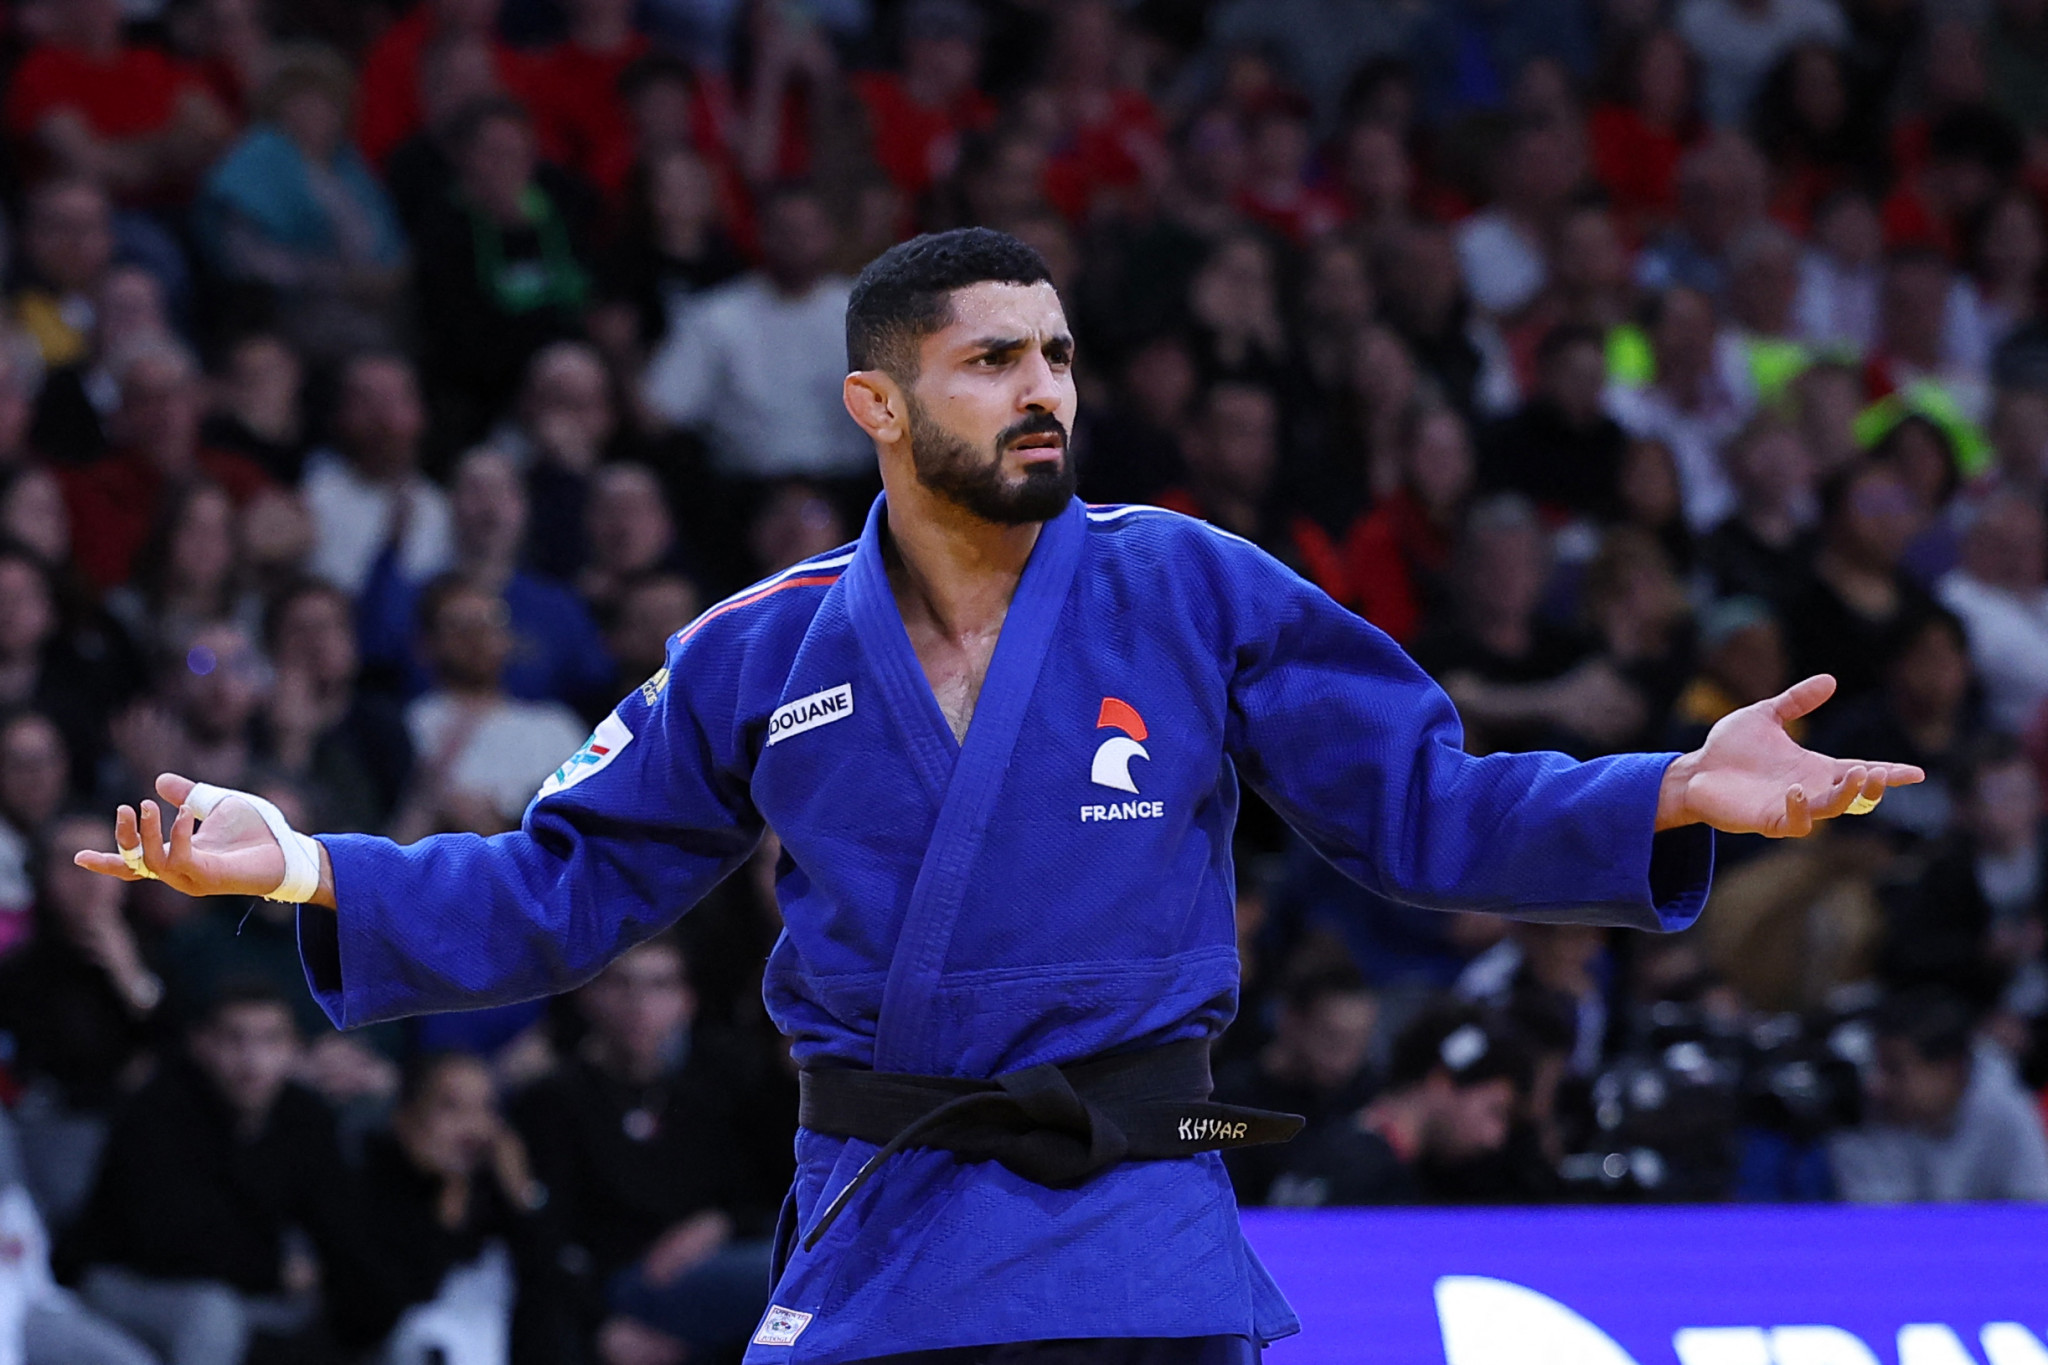 Walide Khyar, who is yet to medal in 2023, will start as the number one for the French in the men's under-66kg category, as nine of the top-10 ranked judokas in the category will not be taking part in Uzbekistan ©Getty Images